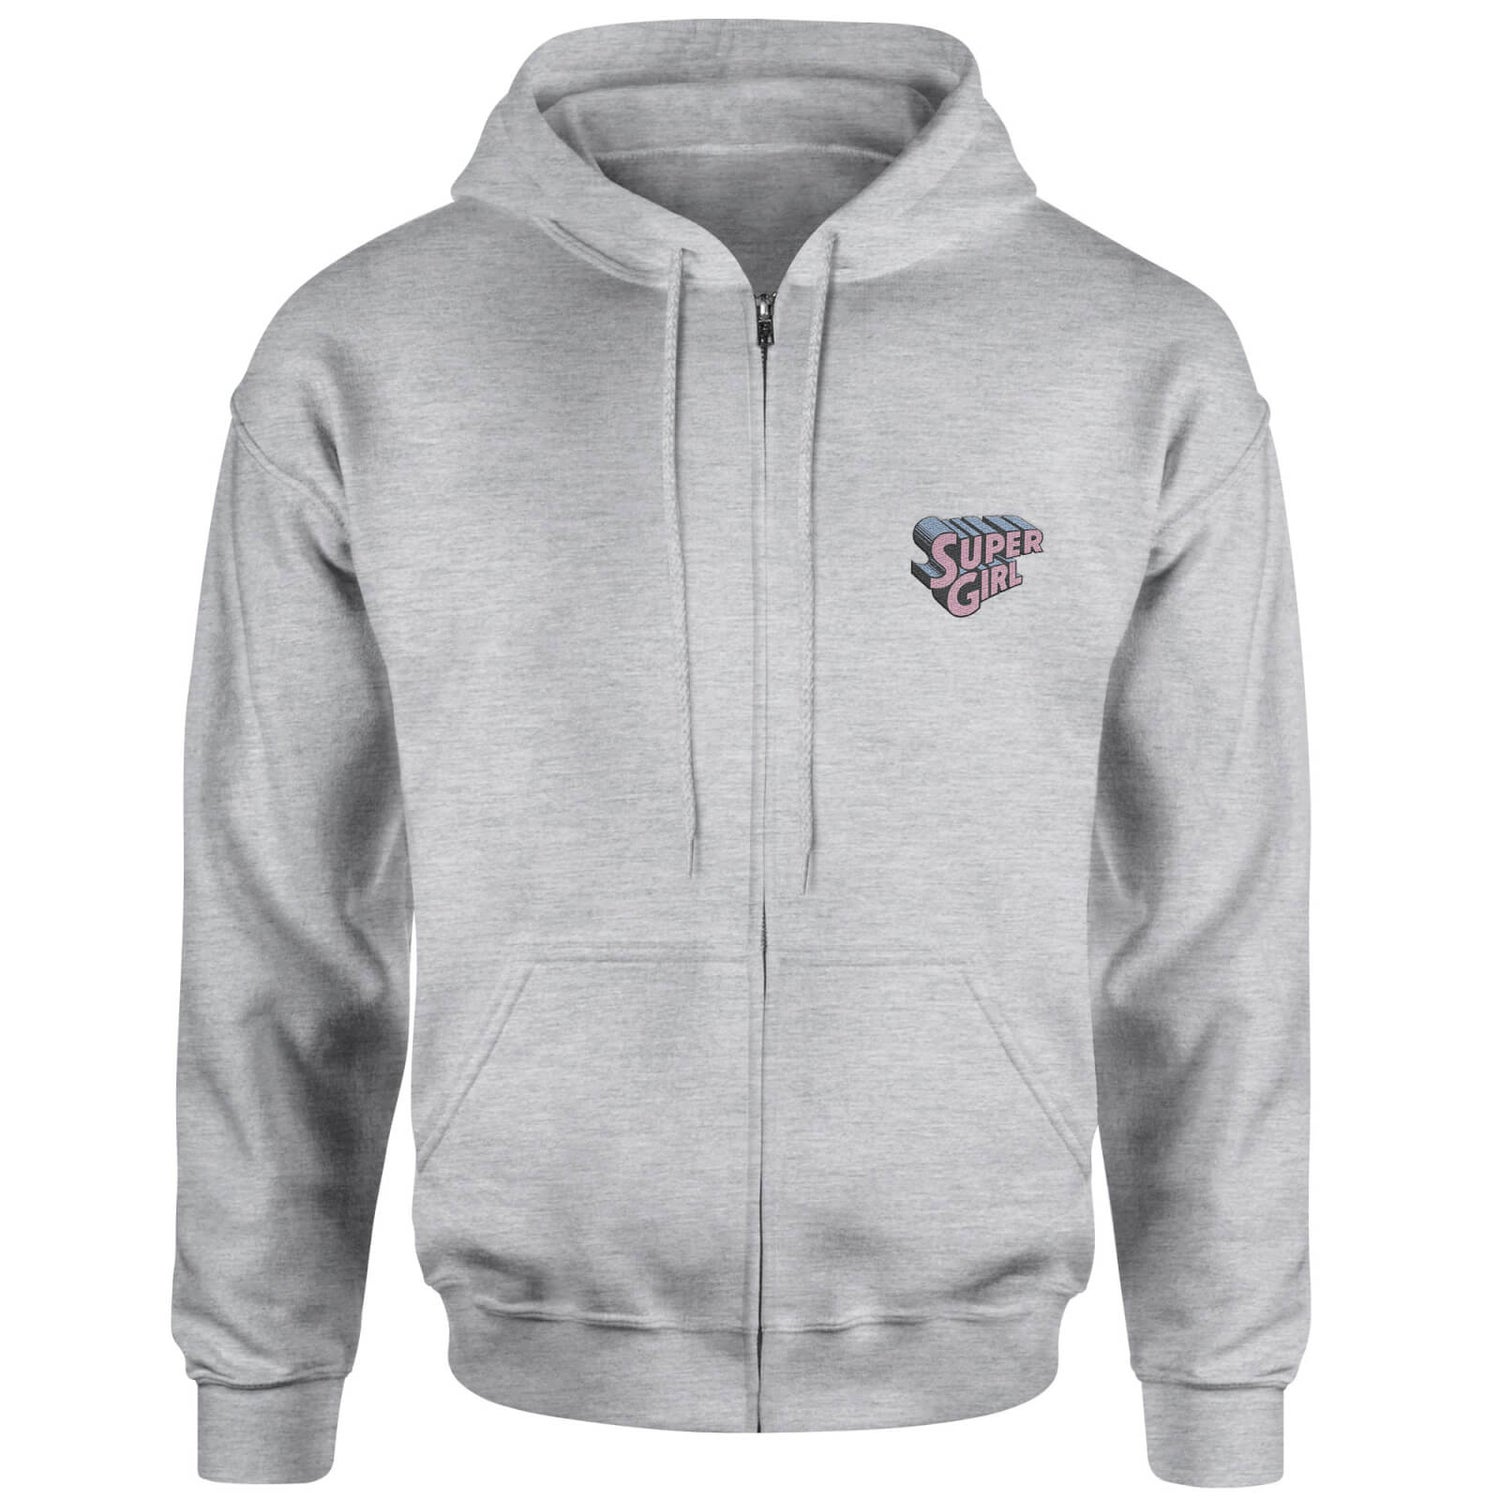 Supergirl Embroidered Unisex Zipped Hoodie - Grey